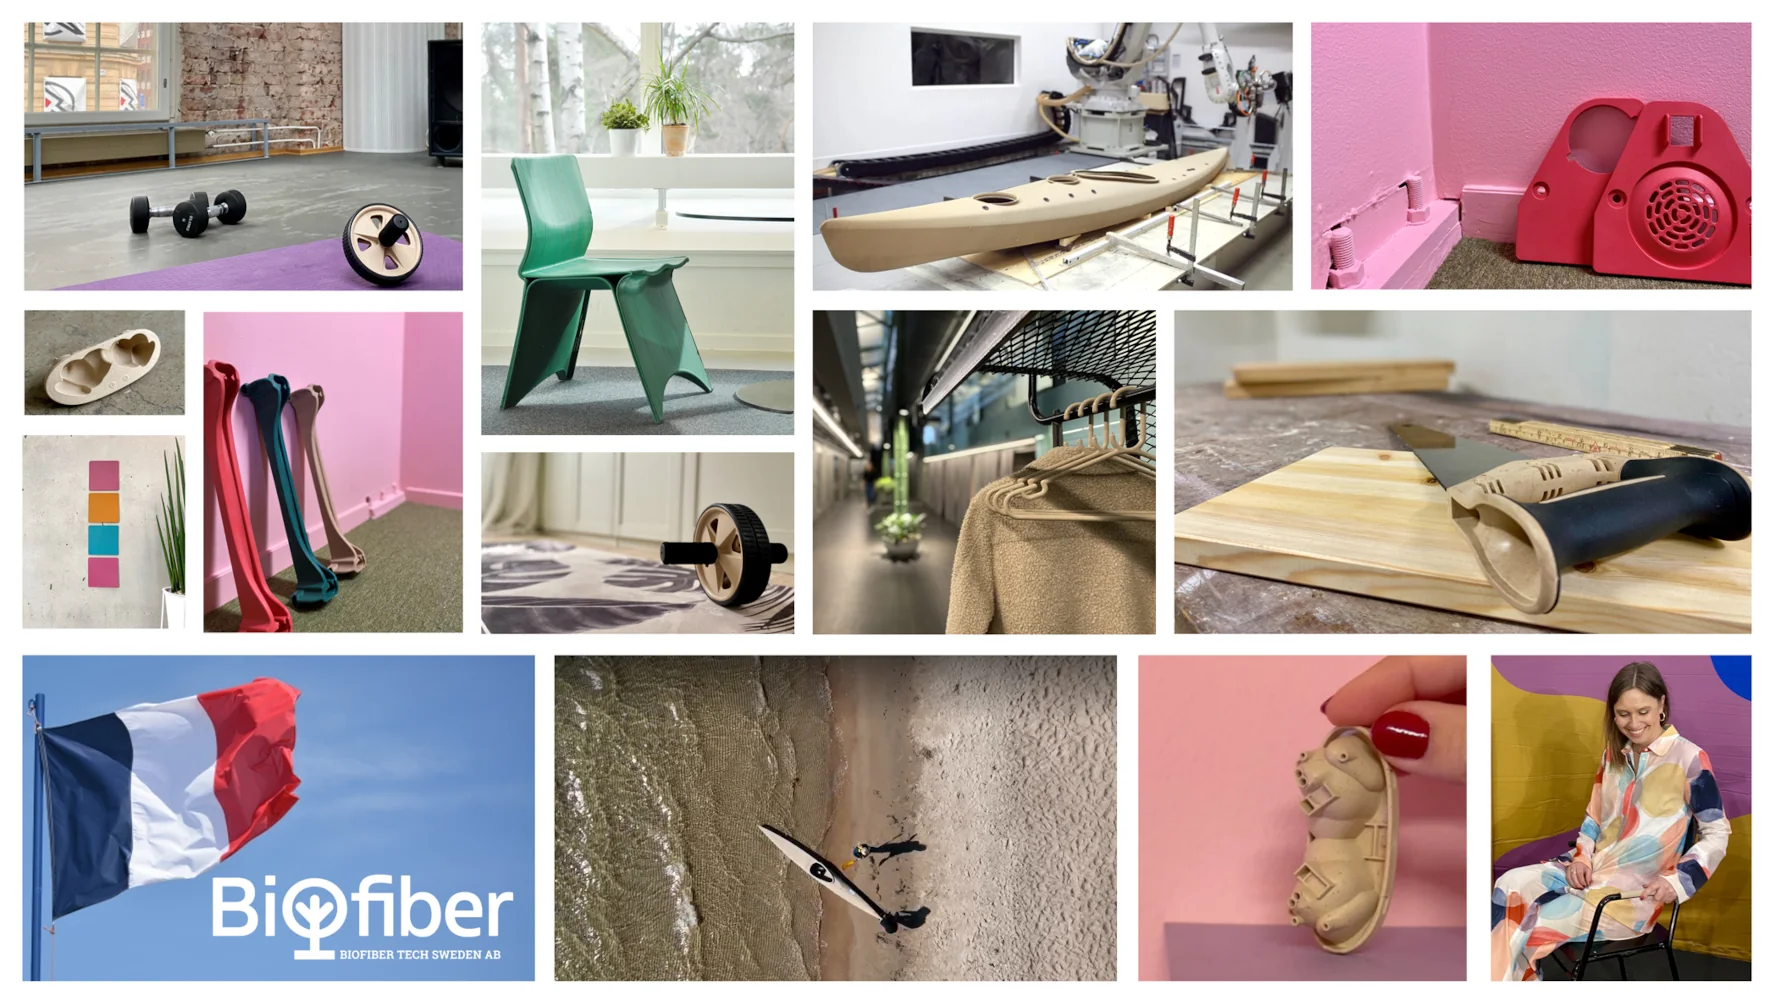 Image 3: Examples of FibraQ®'s wood fiber-based compounds: showcasing applications in various consumer products (© Biofiber Tech).